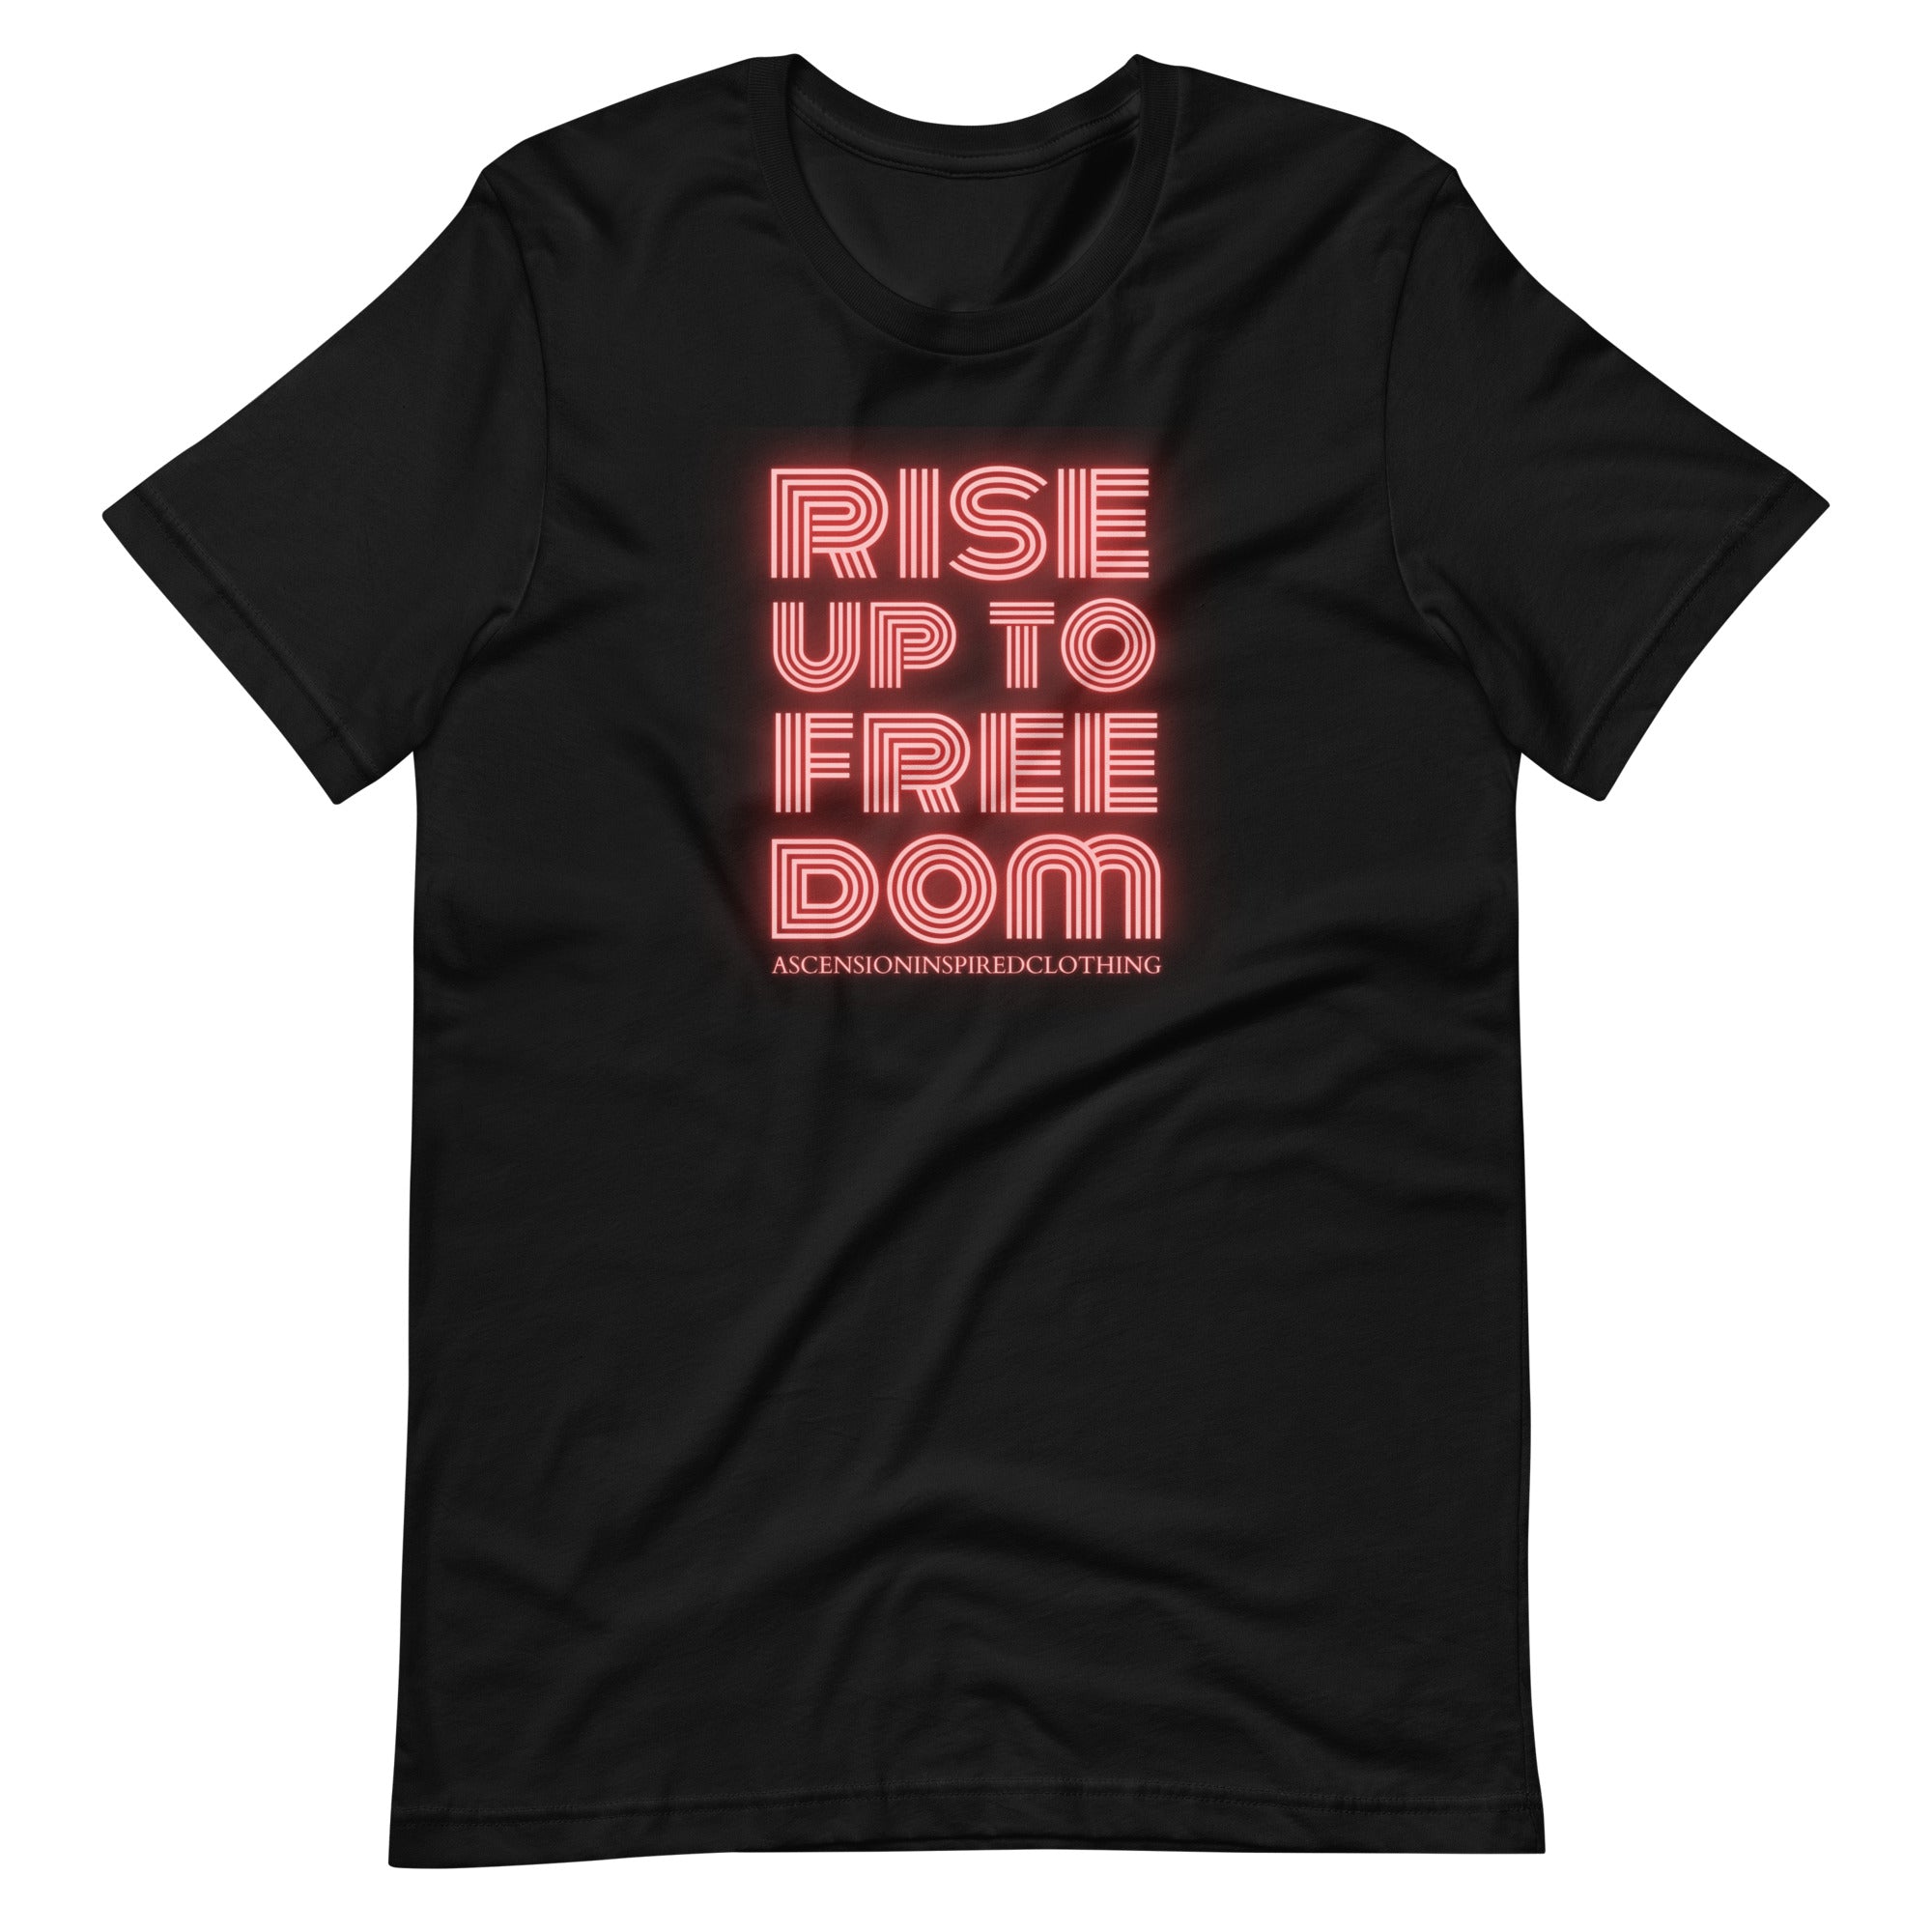 Rise Up To Freedom T Shirt